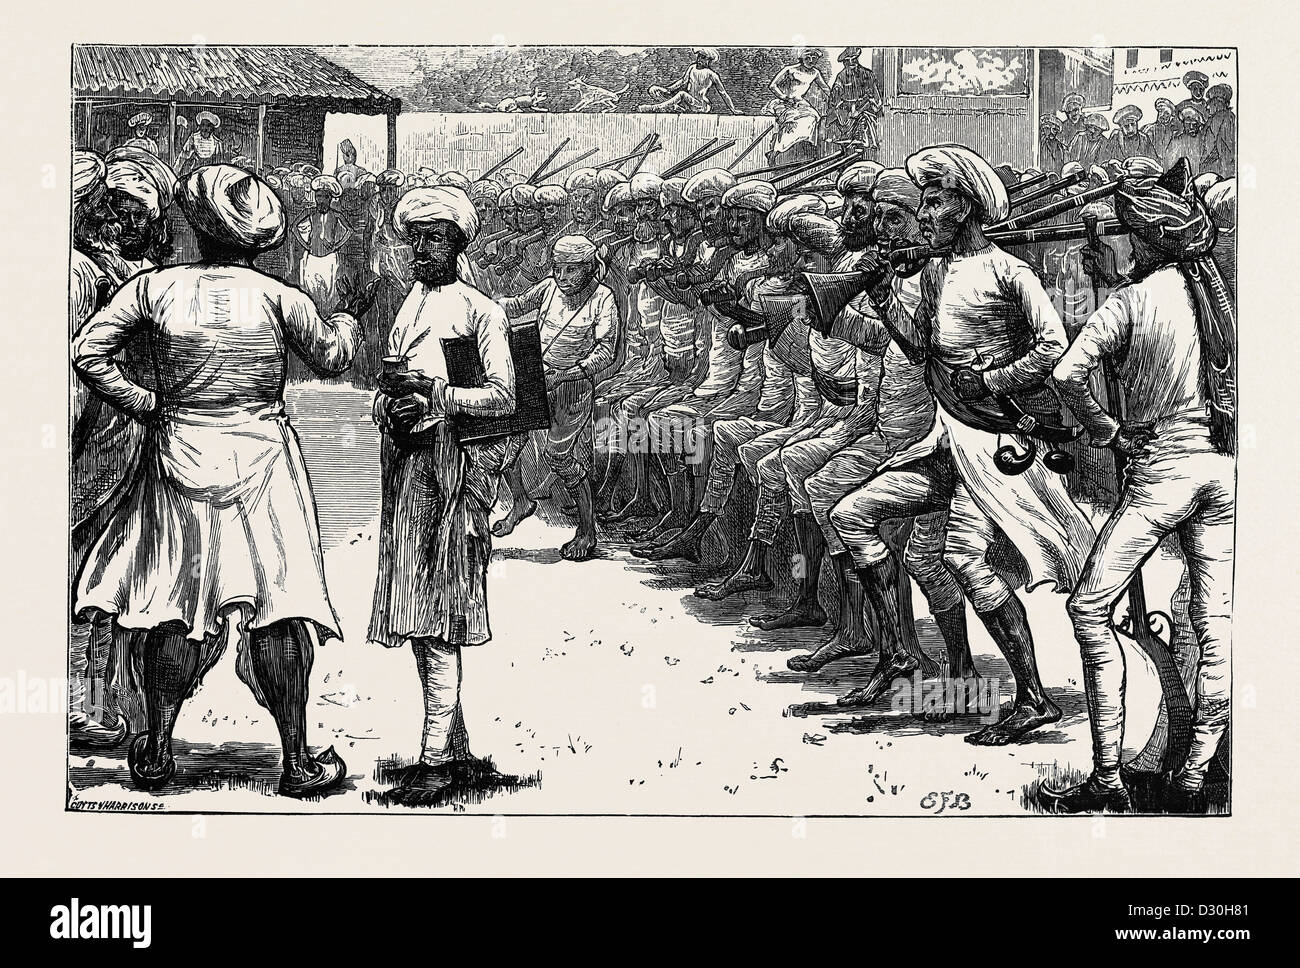 SKETCHES FROM INDIA: MUSTER OF THE IRREGULAR TROOPS OF A NATIVE STATE Stock Photo